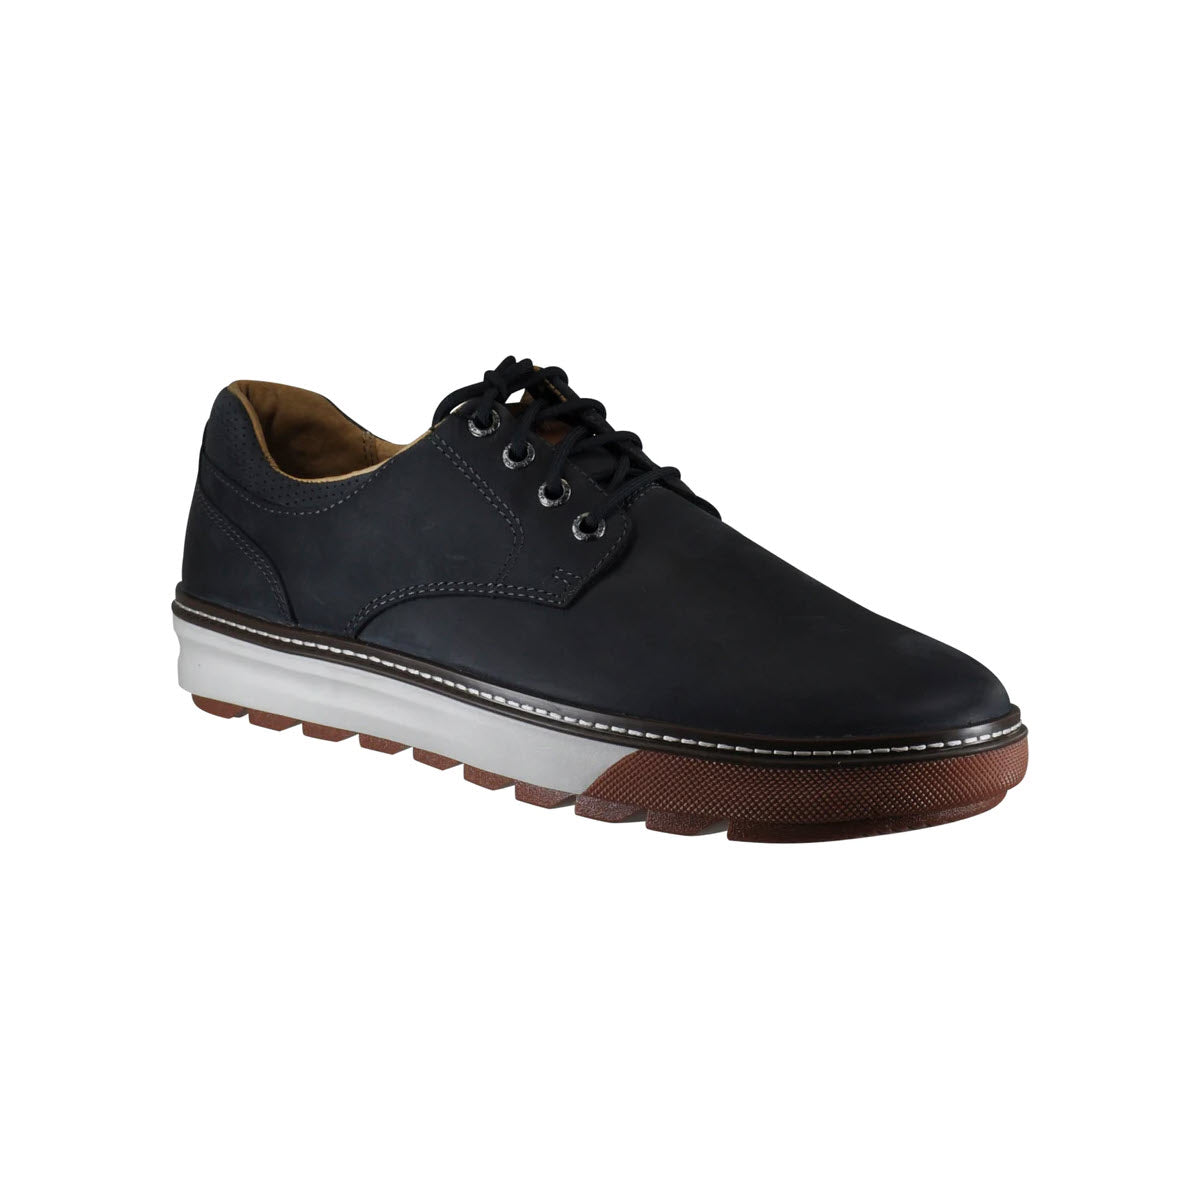 A JOHNSTON AND MURPHY MCGUFFEY LUG PLAIN TOE WATERPROOF DENIM - MENS casual shoe with lace-up closure and a chunky brown sole, isolated on a white background.